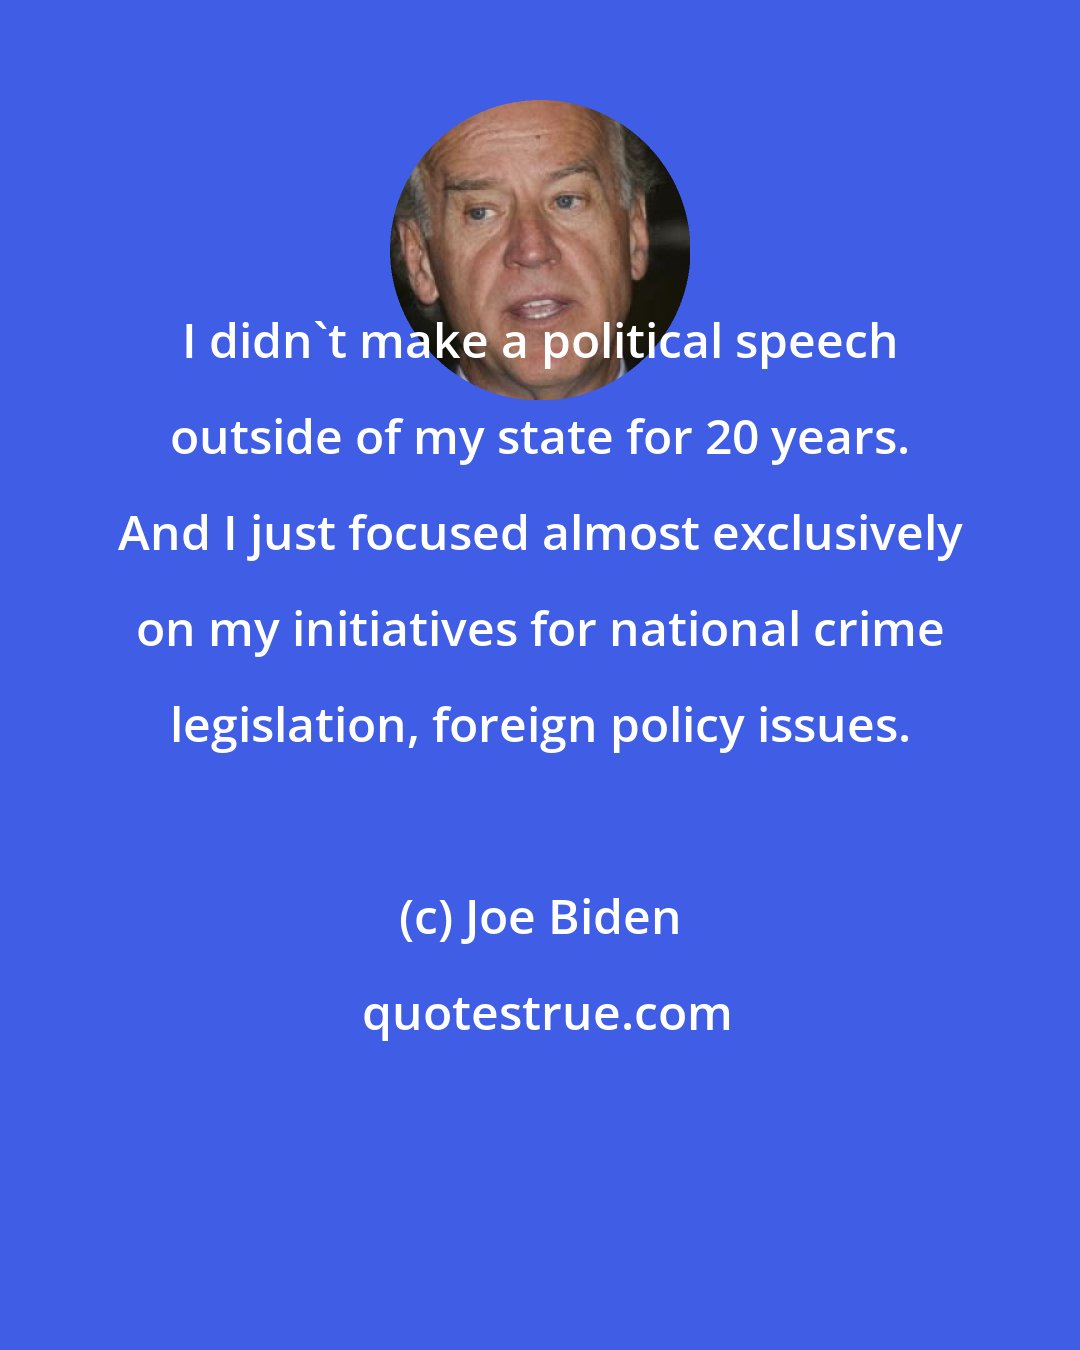 Joe Biden: I didn't make a political speech outside of my state for 20 years. And I just focused almost exclusively on my initiatives for national crime legislation, foreign policy issues.